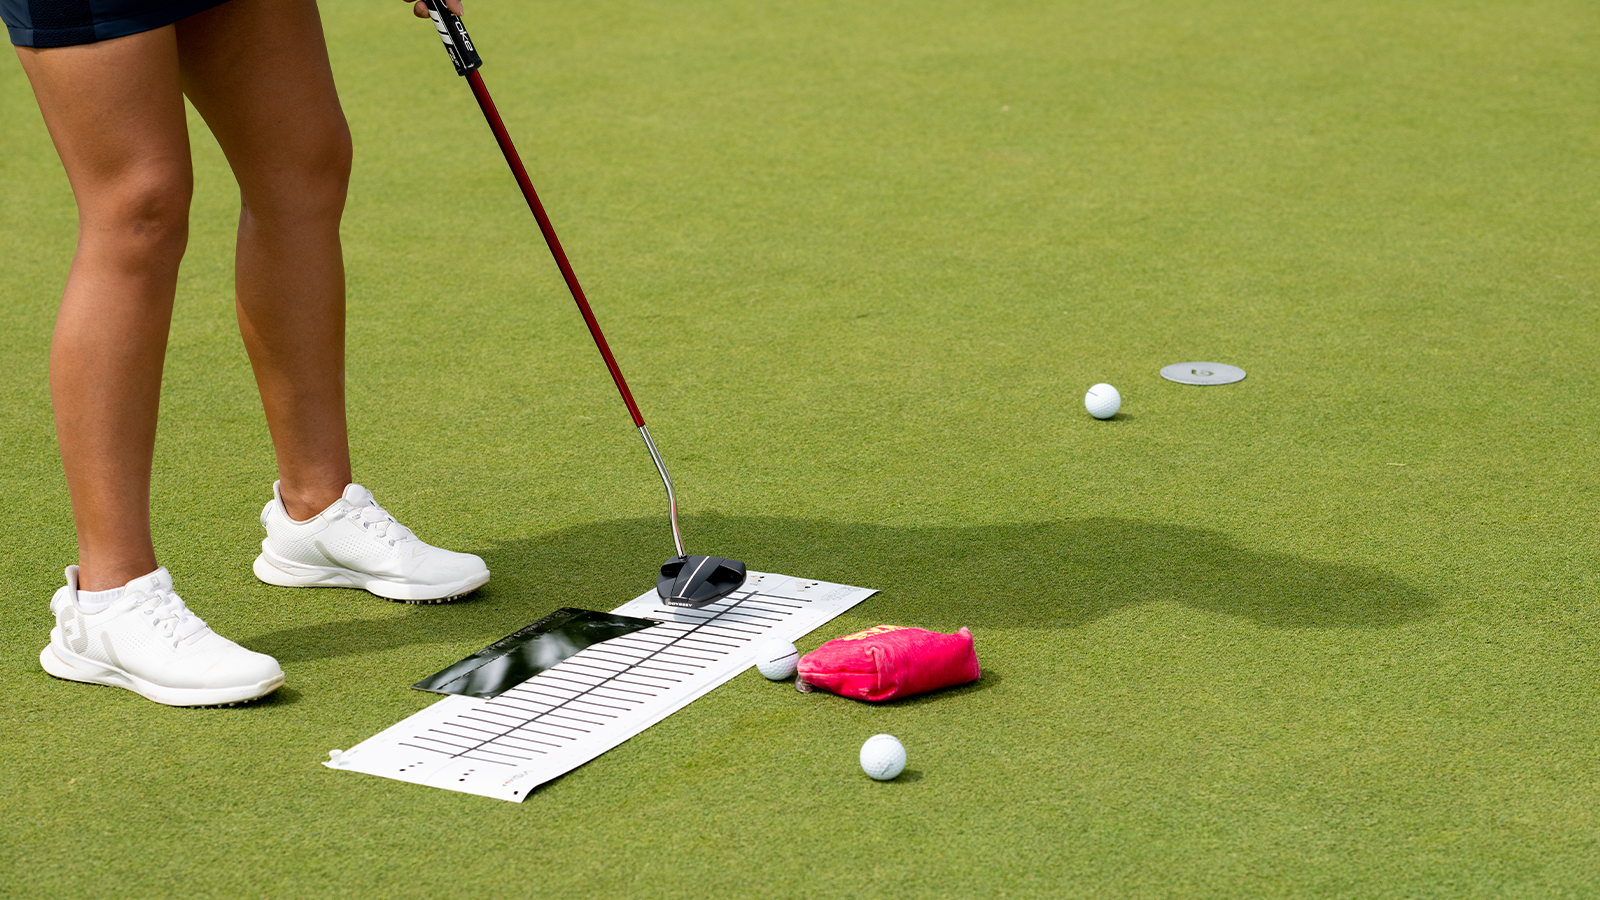 A contestant hit her putt during a practice round for the 2022 KPMG Women's PGA Championship at Congressional Country Club on June 21, 2022 in Bethesda, Maryland. (Photo by Matthew Harris/PGA of America)